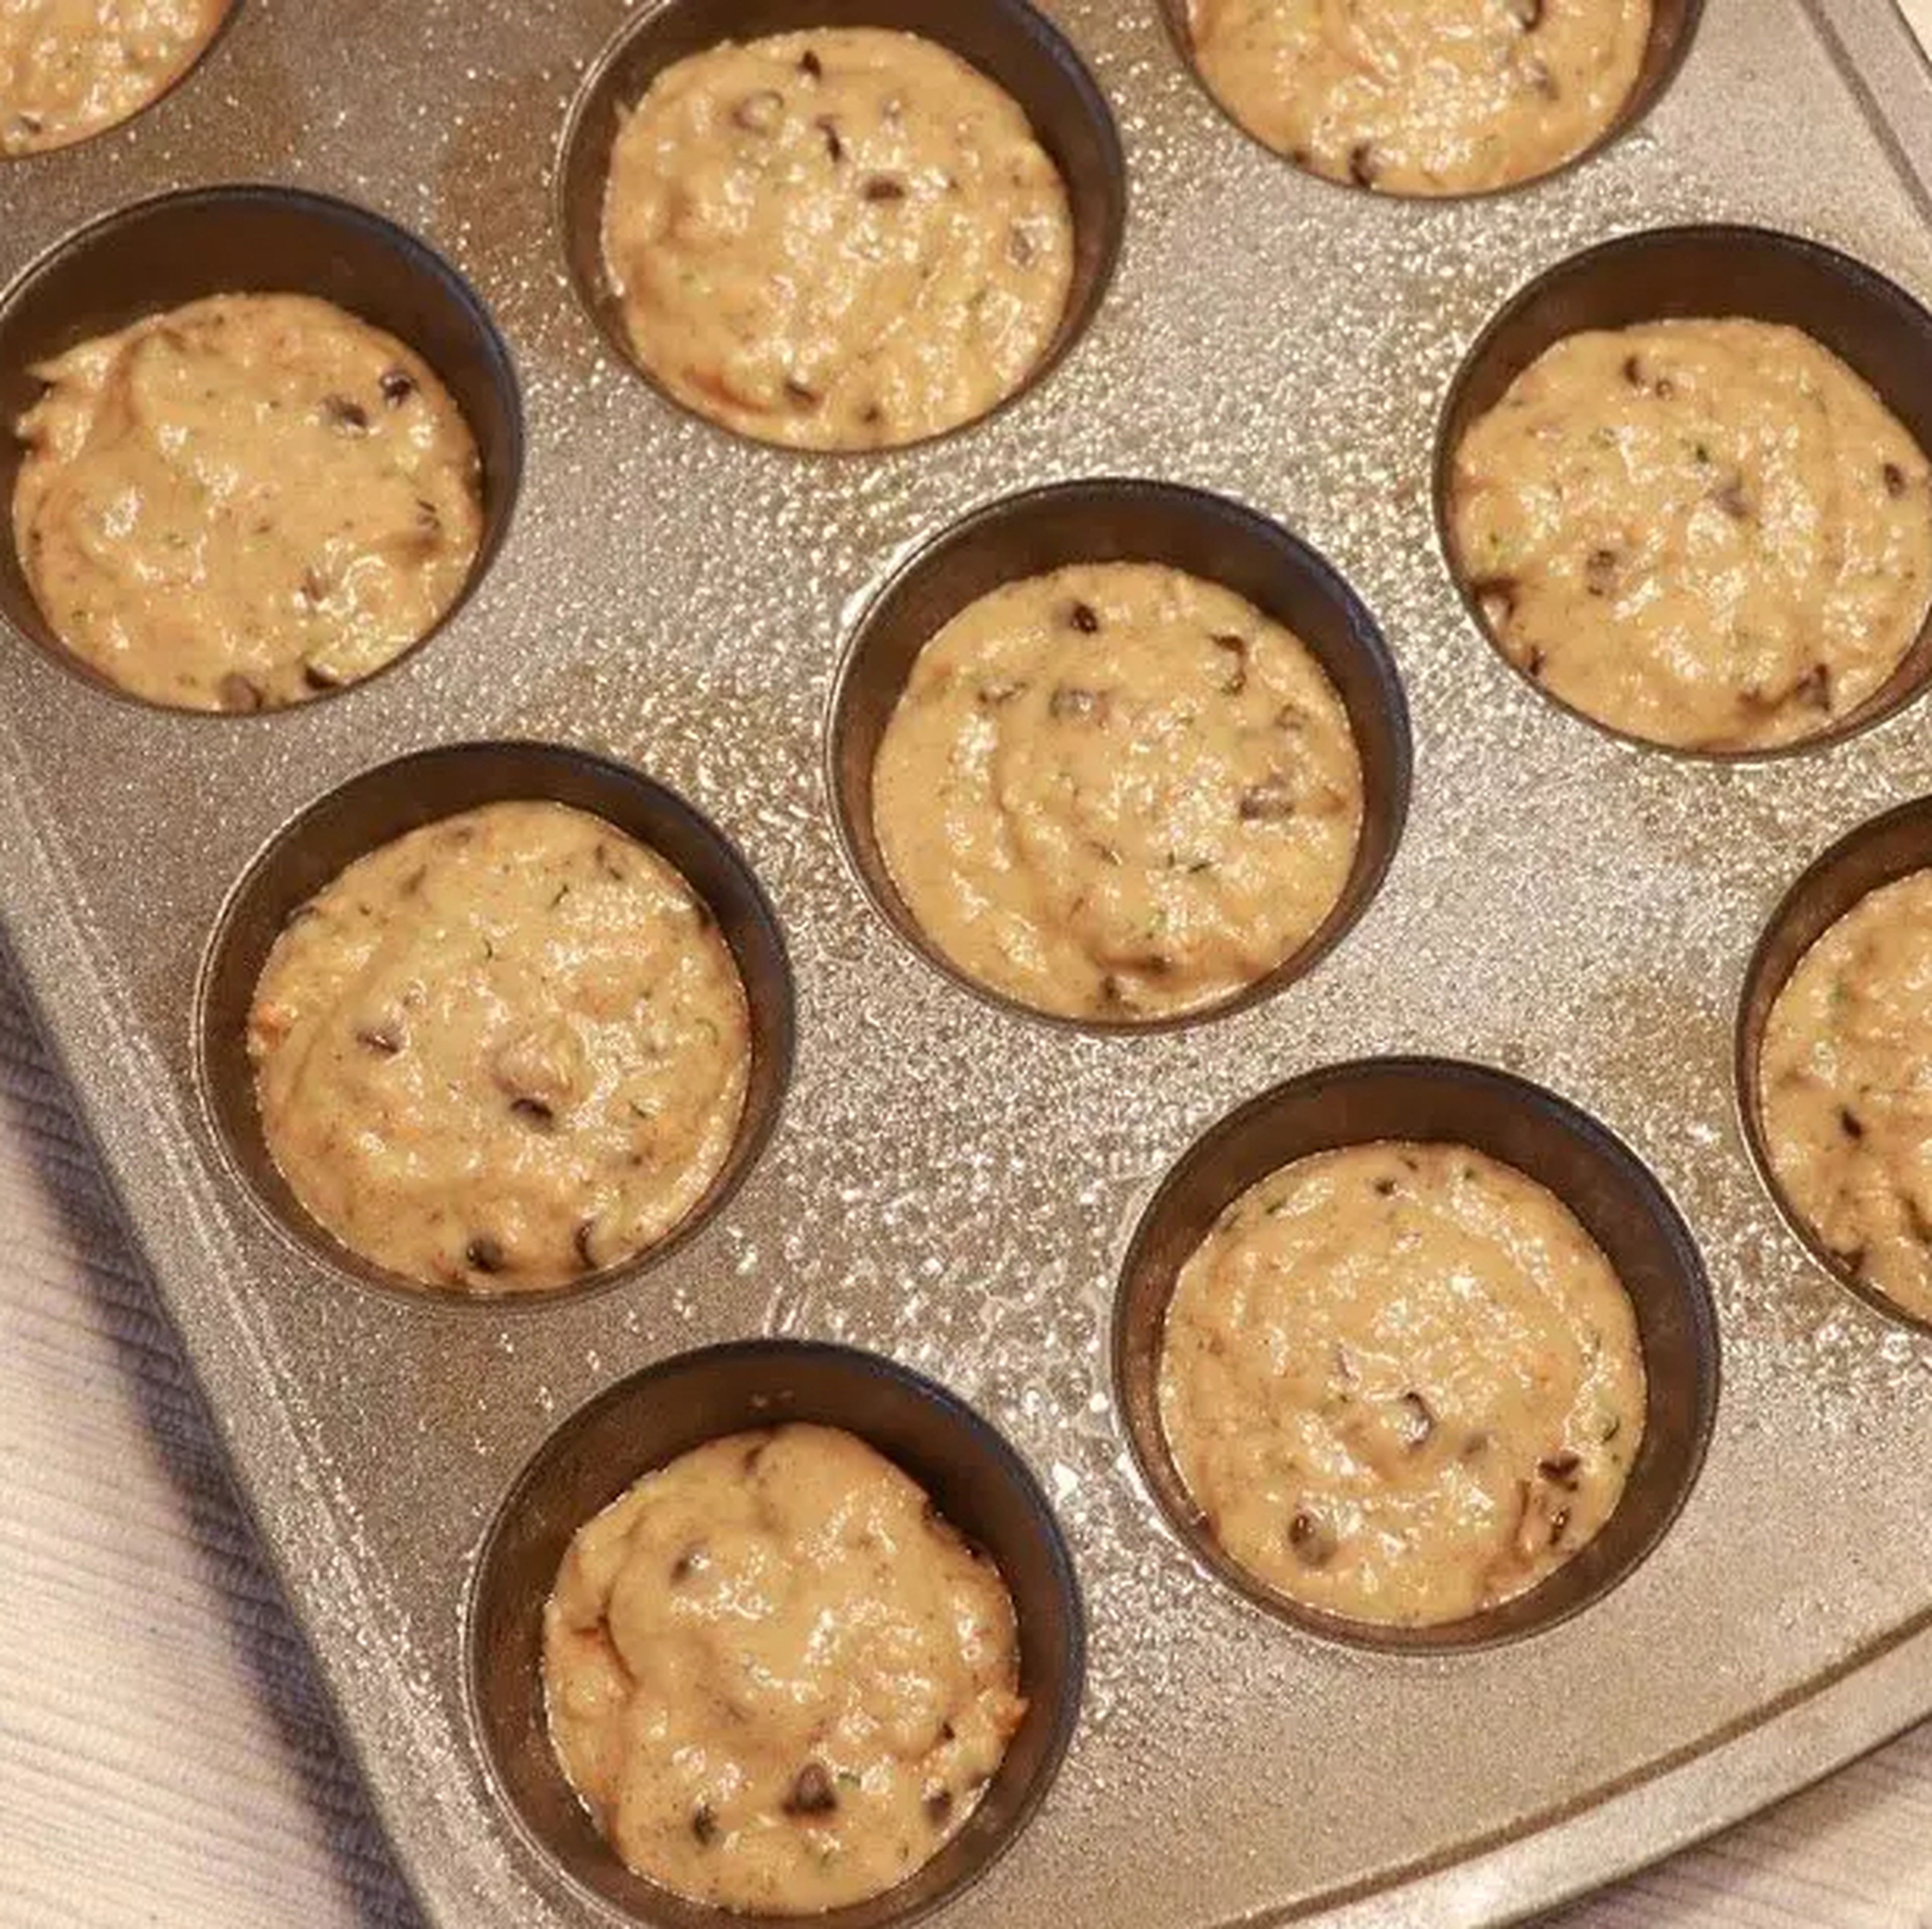 Fill prepared muffin cups about two-thirds full with muffin mixture.